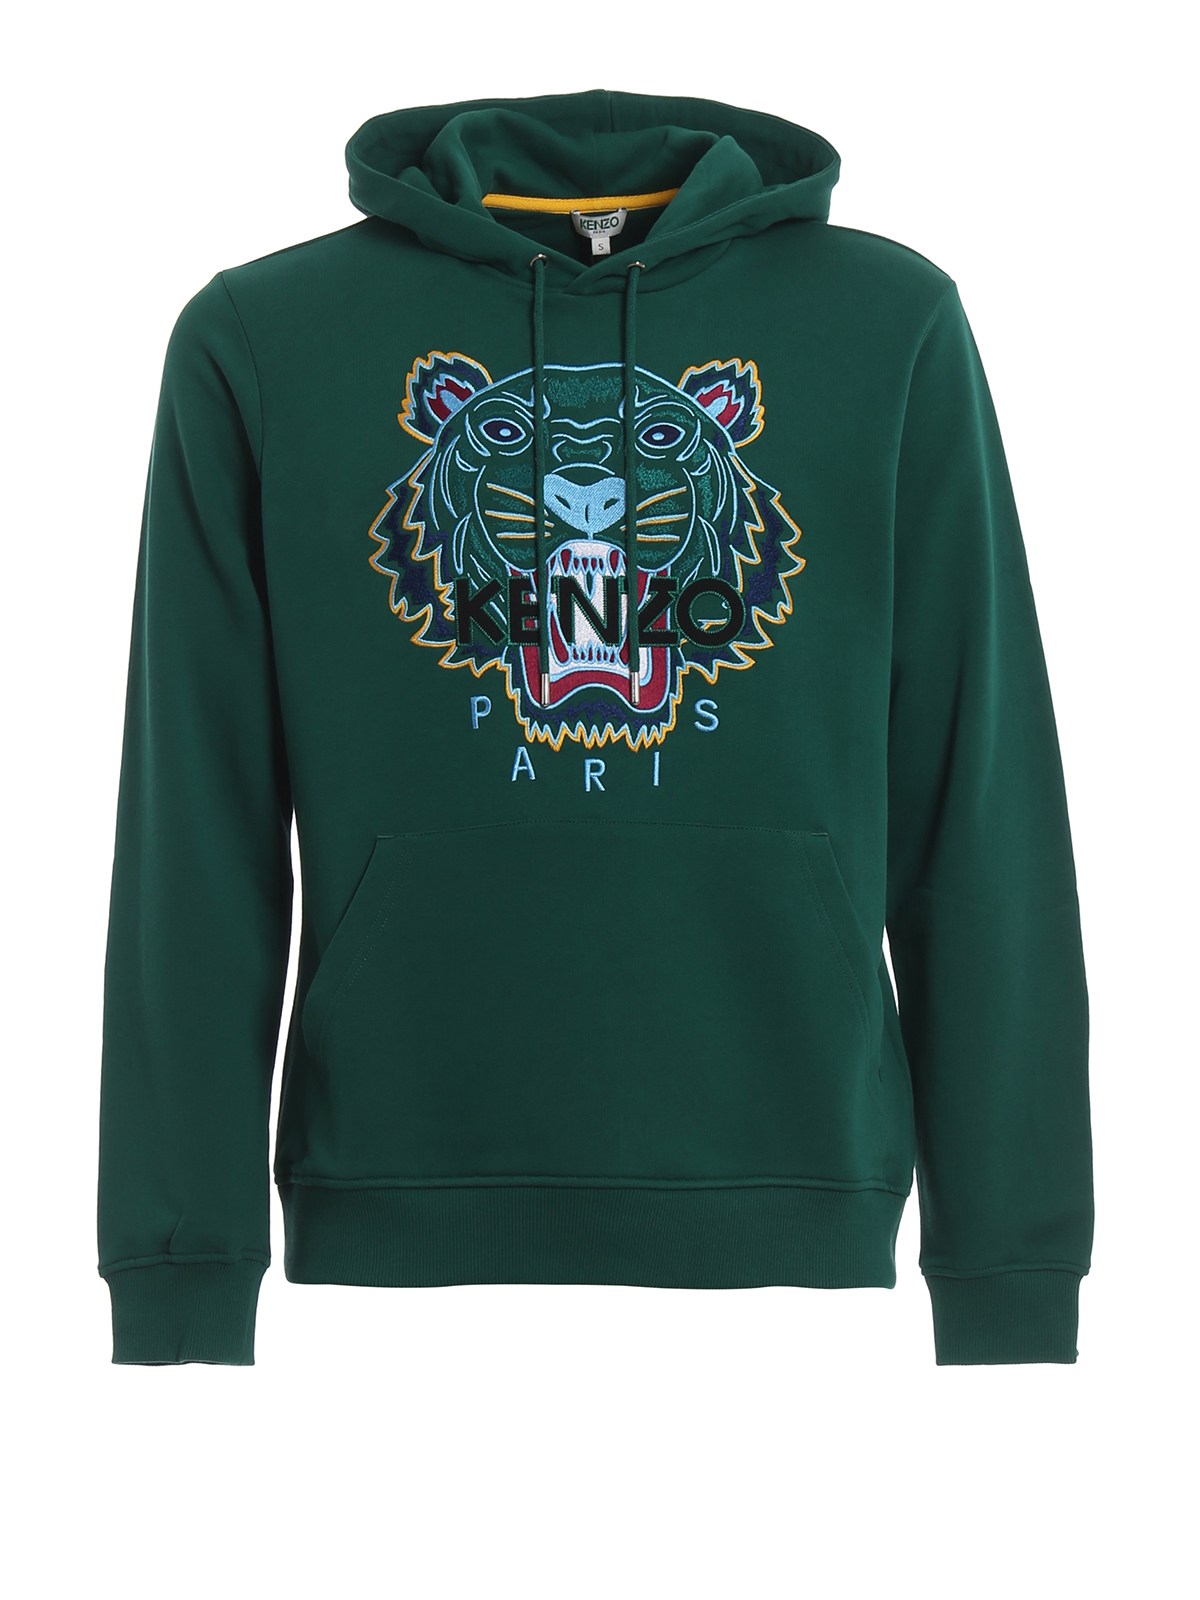 Tiger maxi embroidery green hoodie 